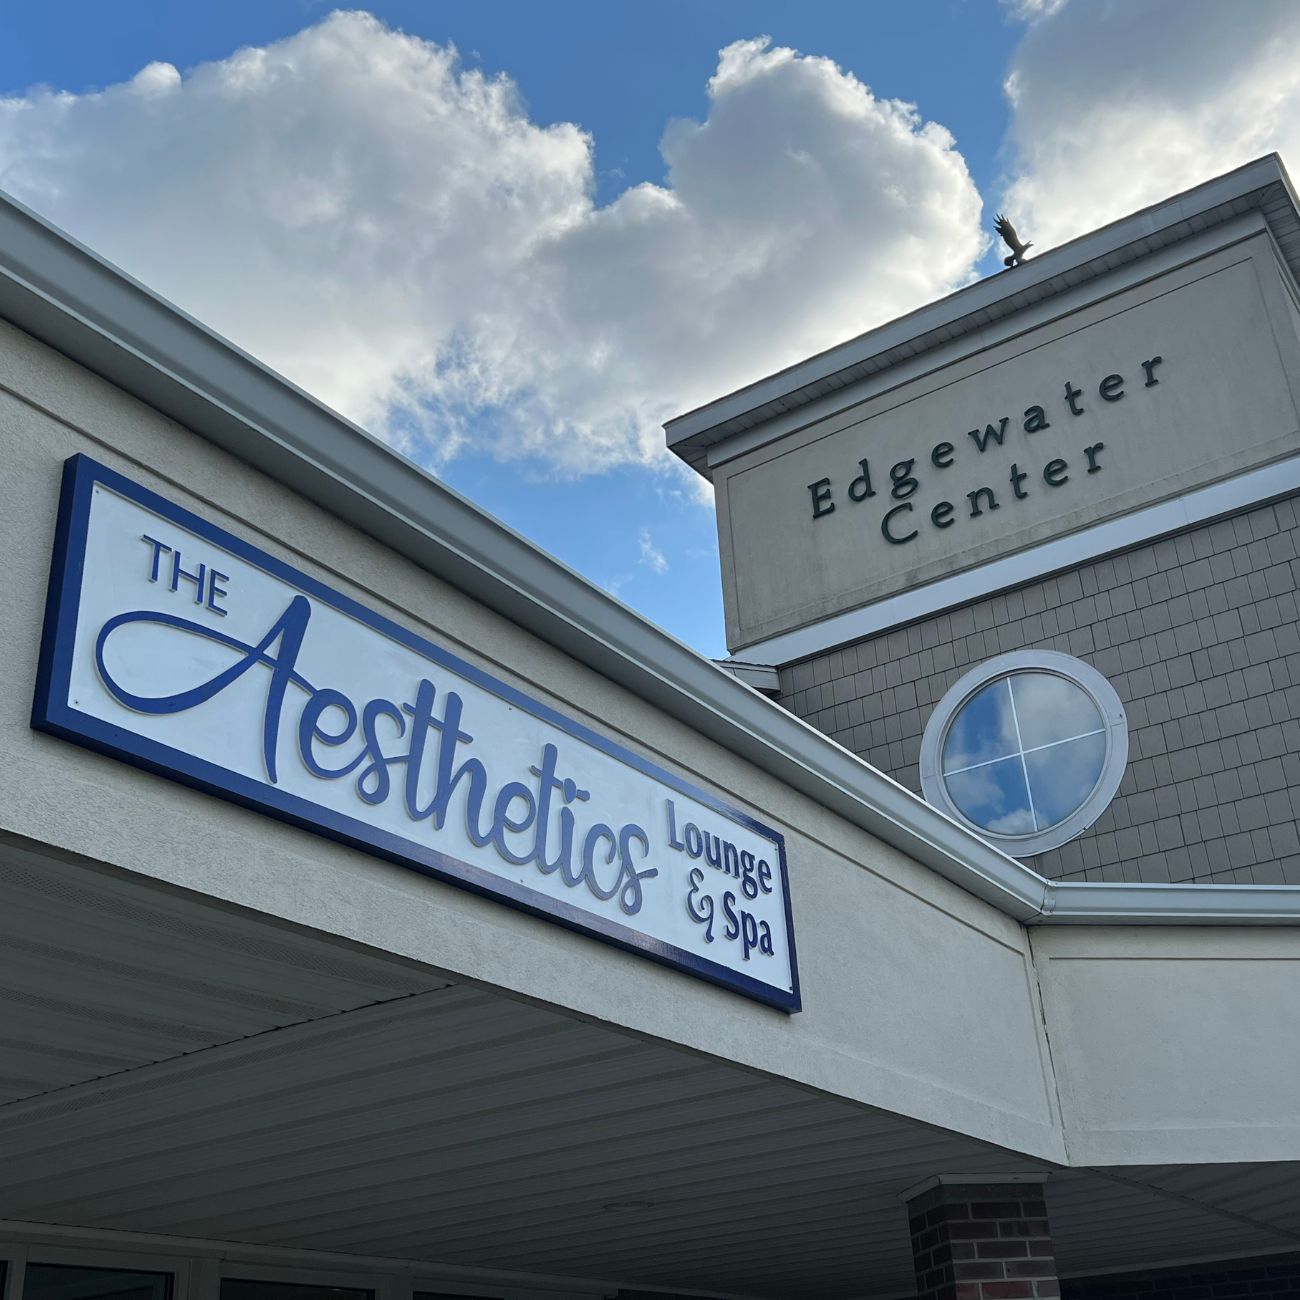 The Aesthetics lounge and spa